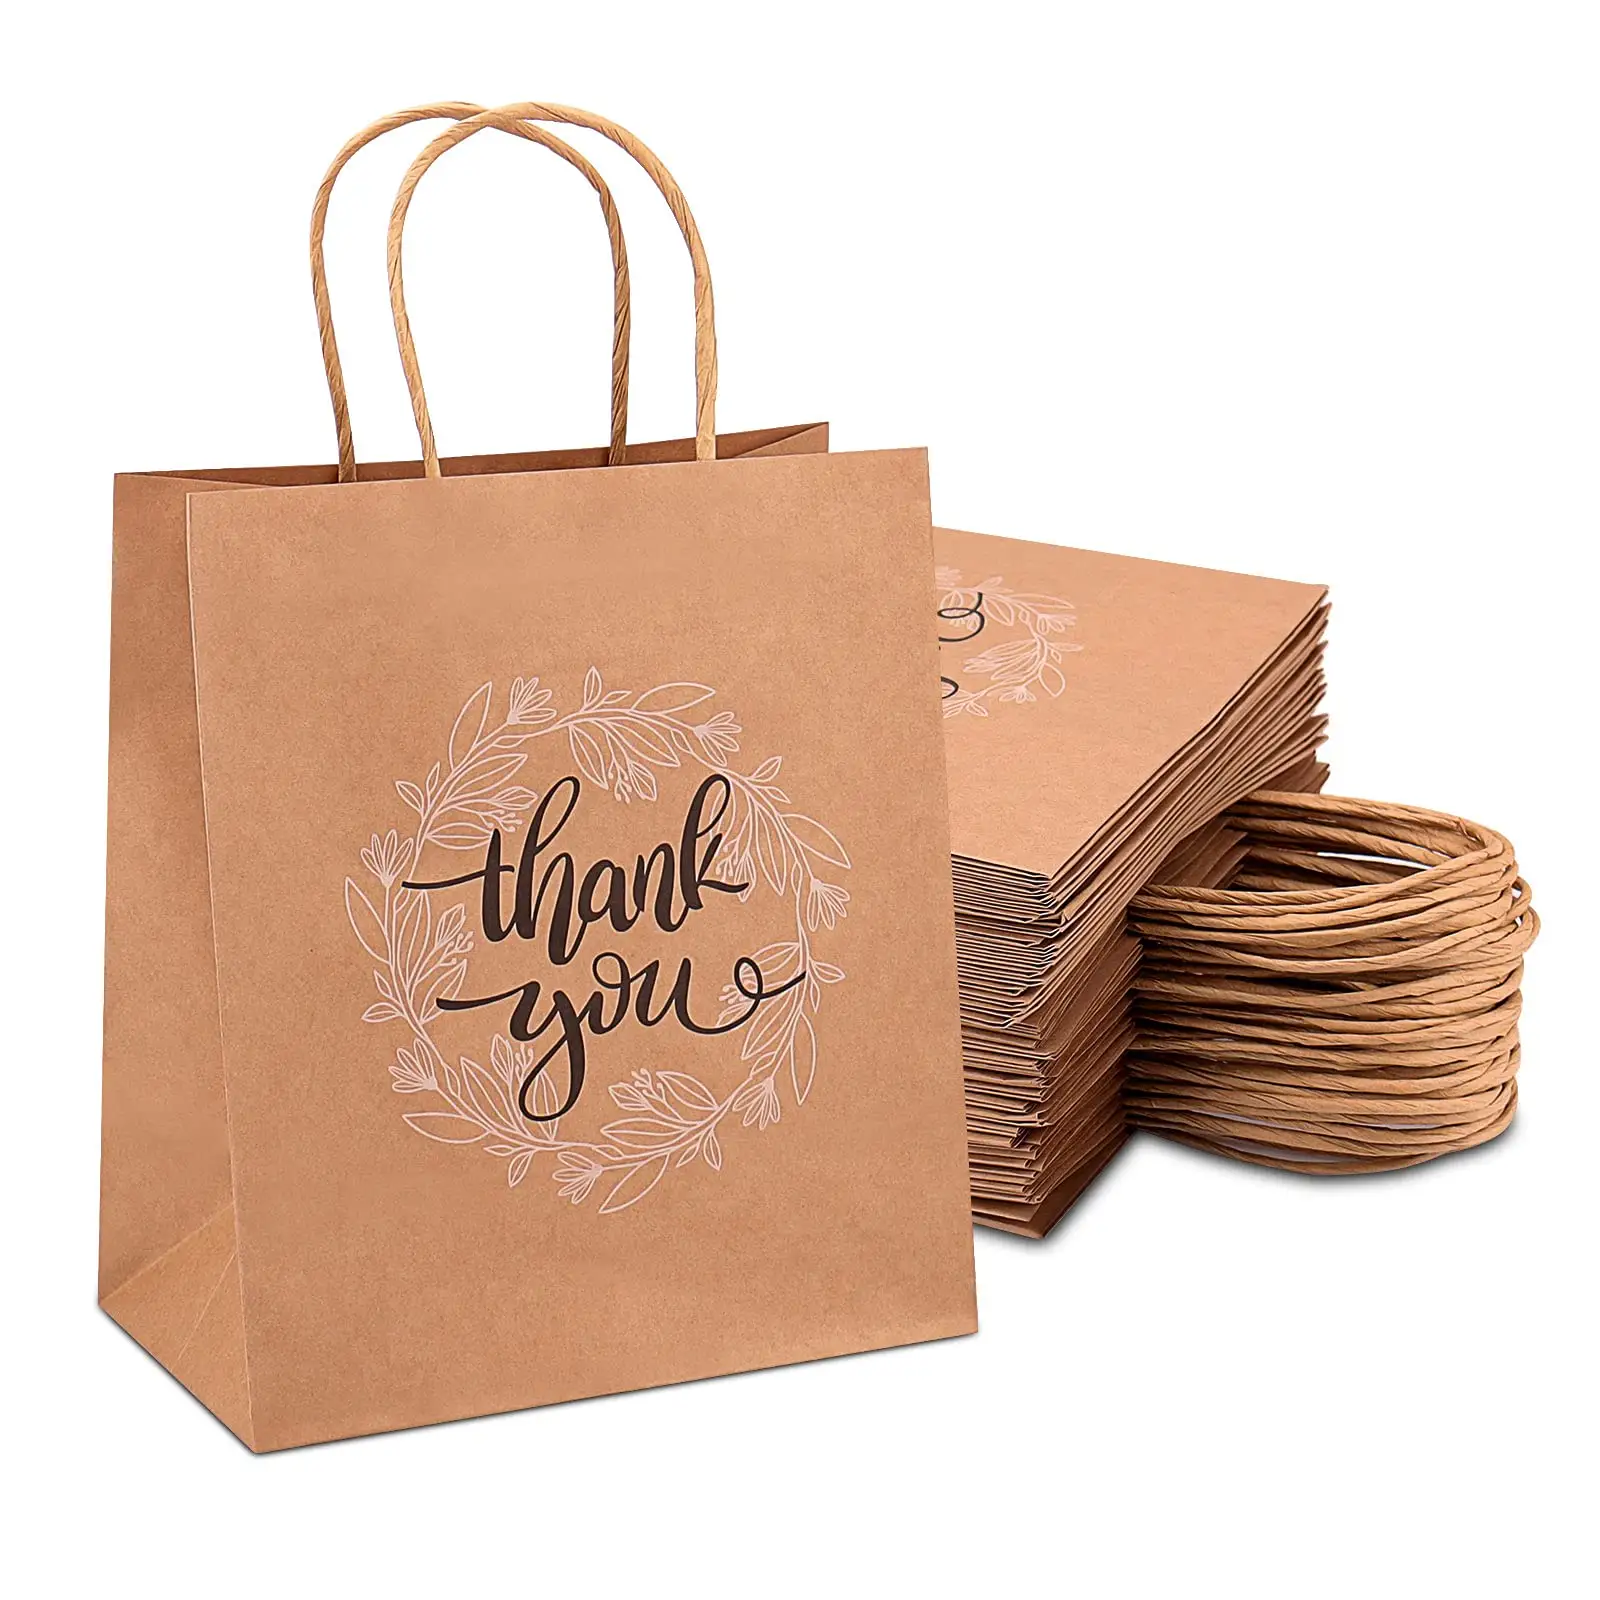 KM Thank You Gift Bags Bulk with Handle, Brown Kraft Paper Bags for Retail Shopping, Wedding, Goodies, Merchandise for Customers